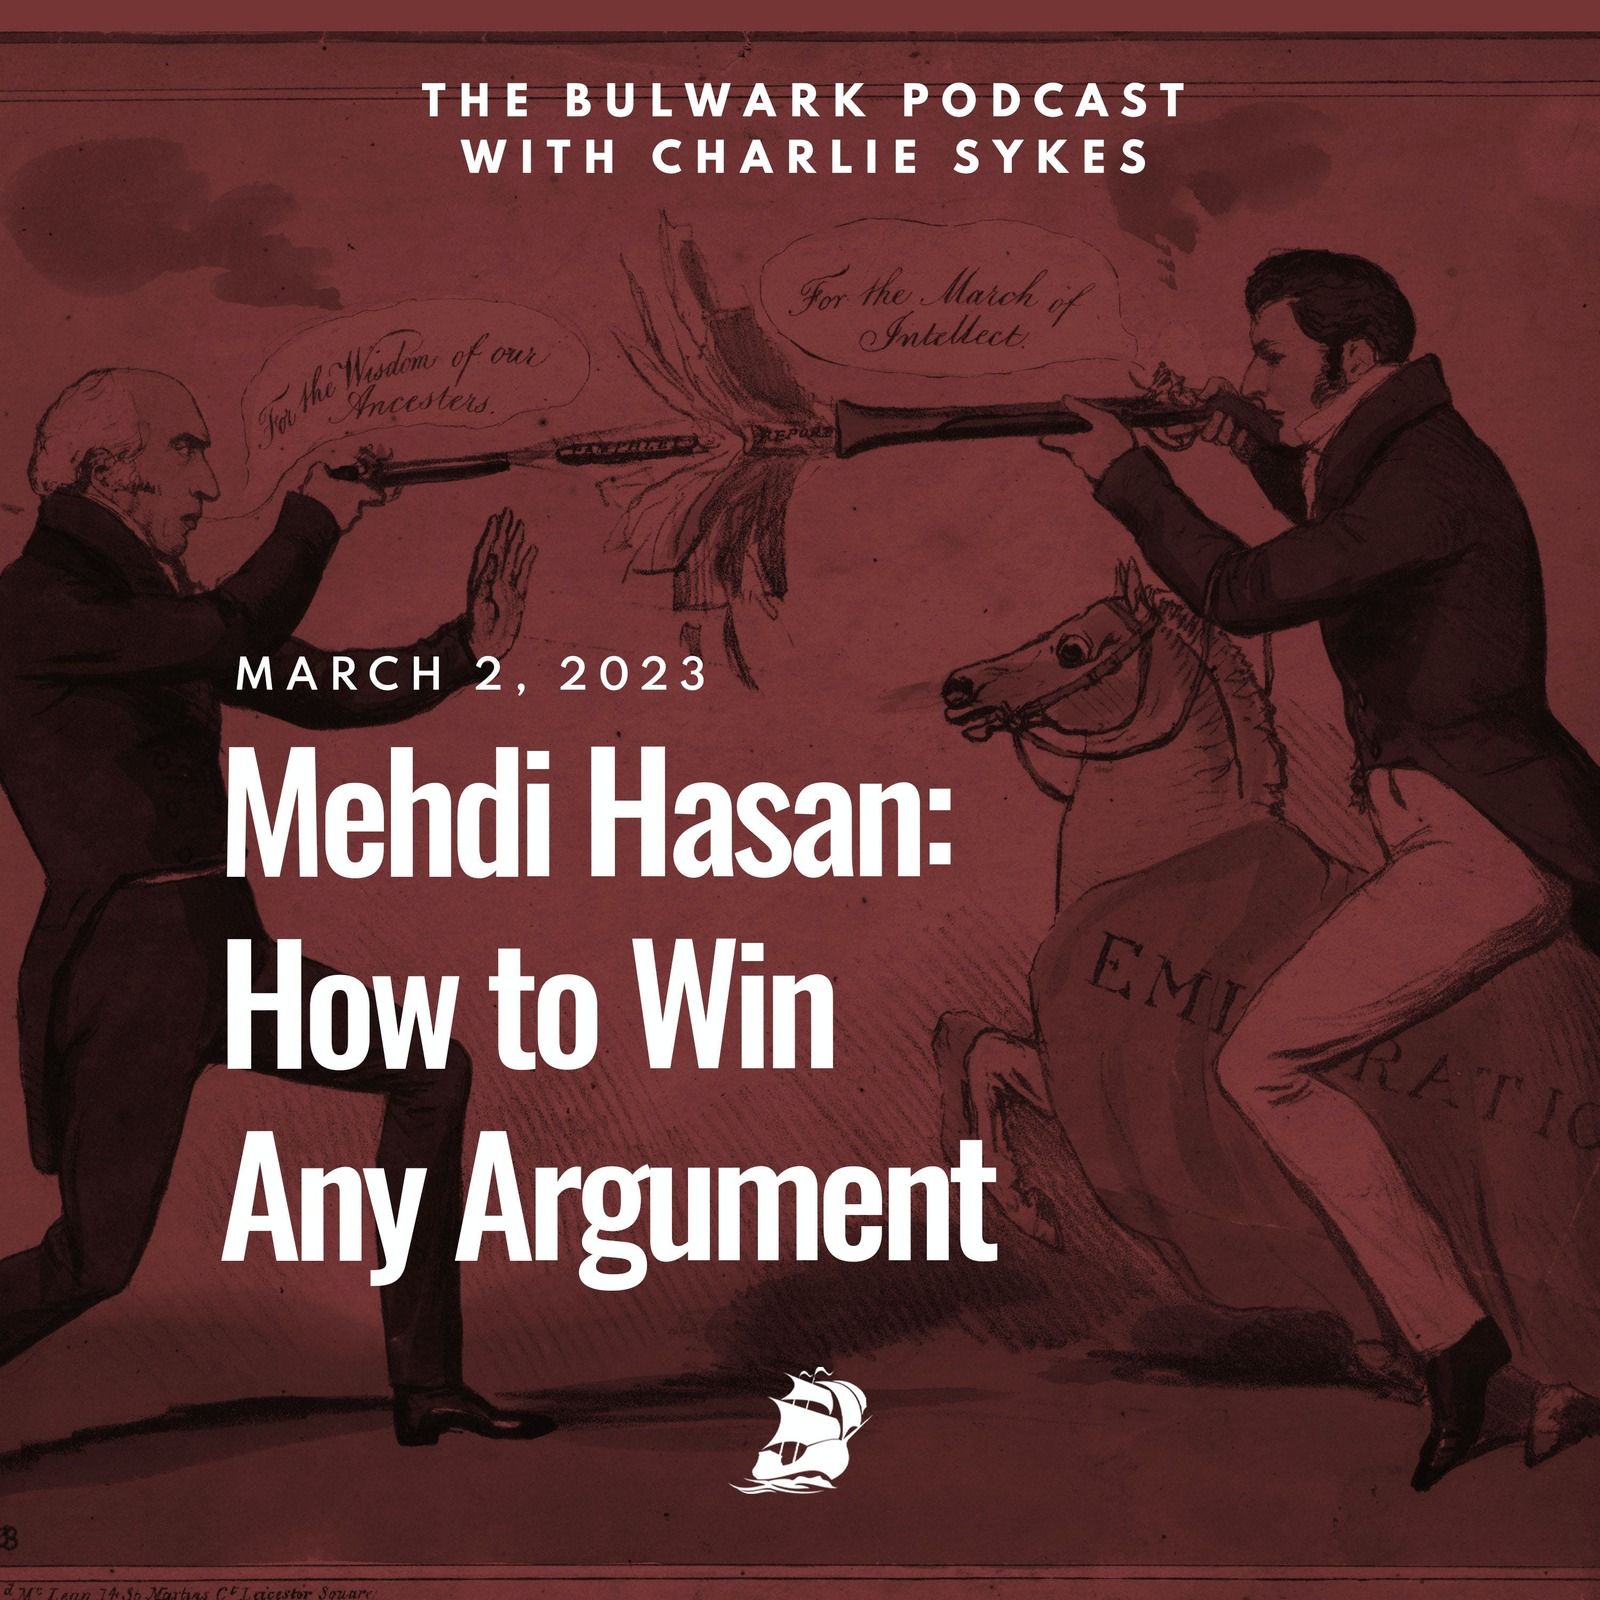 Mehdi Hasan: How to Win Any Argument